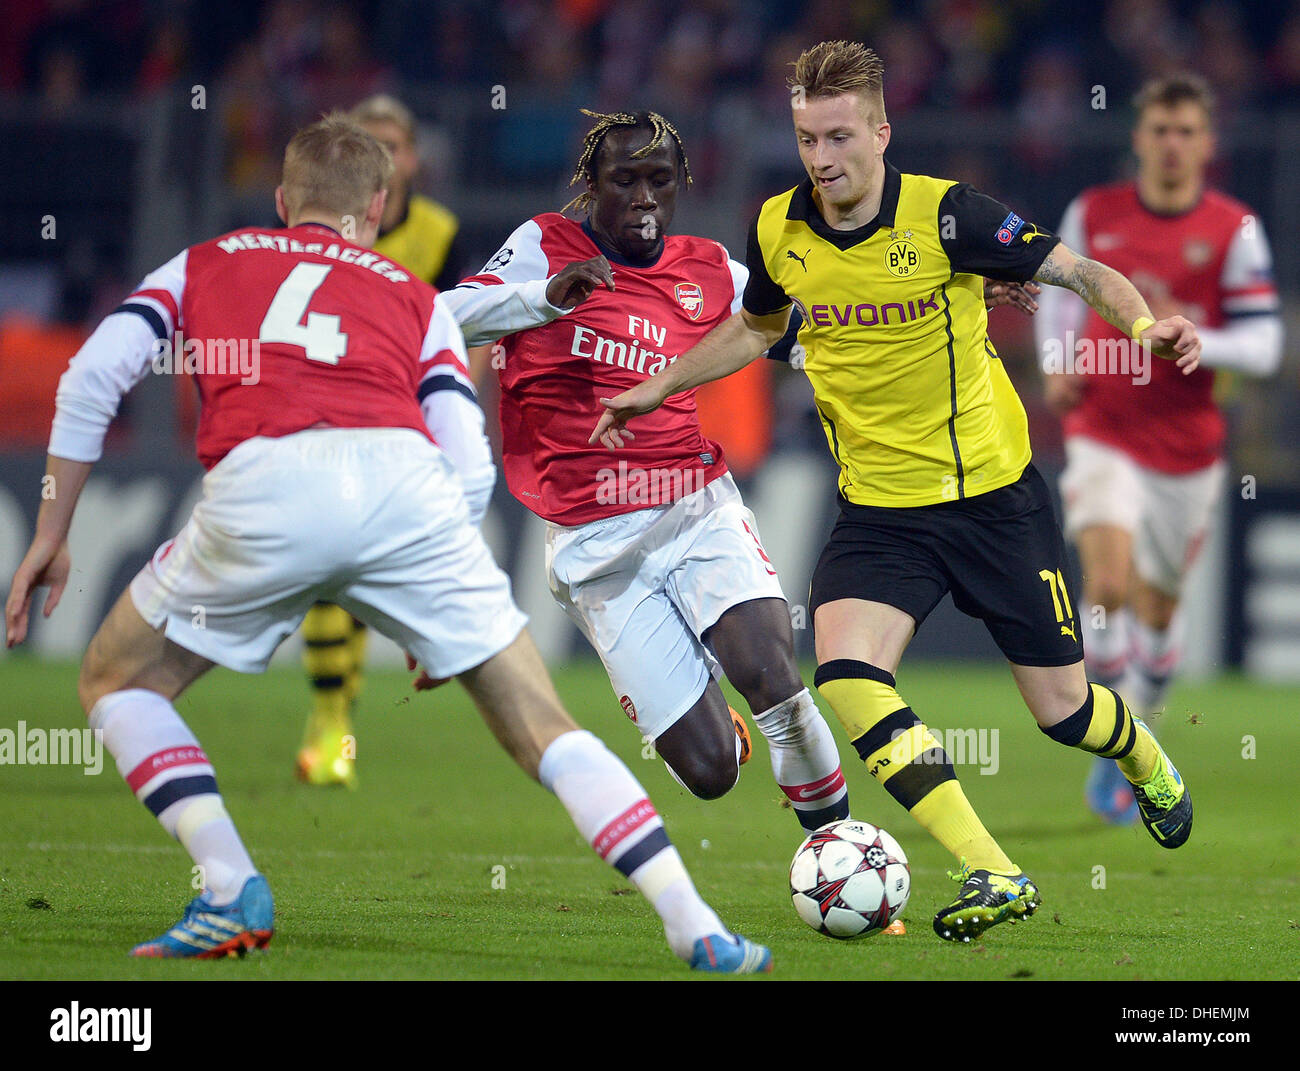 Dortmund, Germany. 06th Nov, 2013. Dortmund's Marco Reus (R) and Arsenals Bacary Sagna (C) and Per Mertesacker vie for the ball during the Champions League soccer match between Borussia Dortmund and FC Arsenal in the BVB stadion in Dortmund, Germany, 06 November 2013. Photo: Federico Gambarini/dpa/Alamy Live News Stock Photo